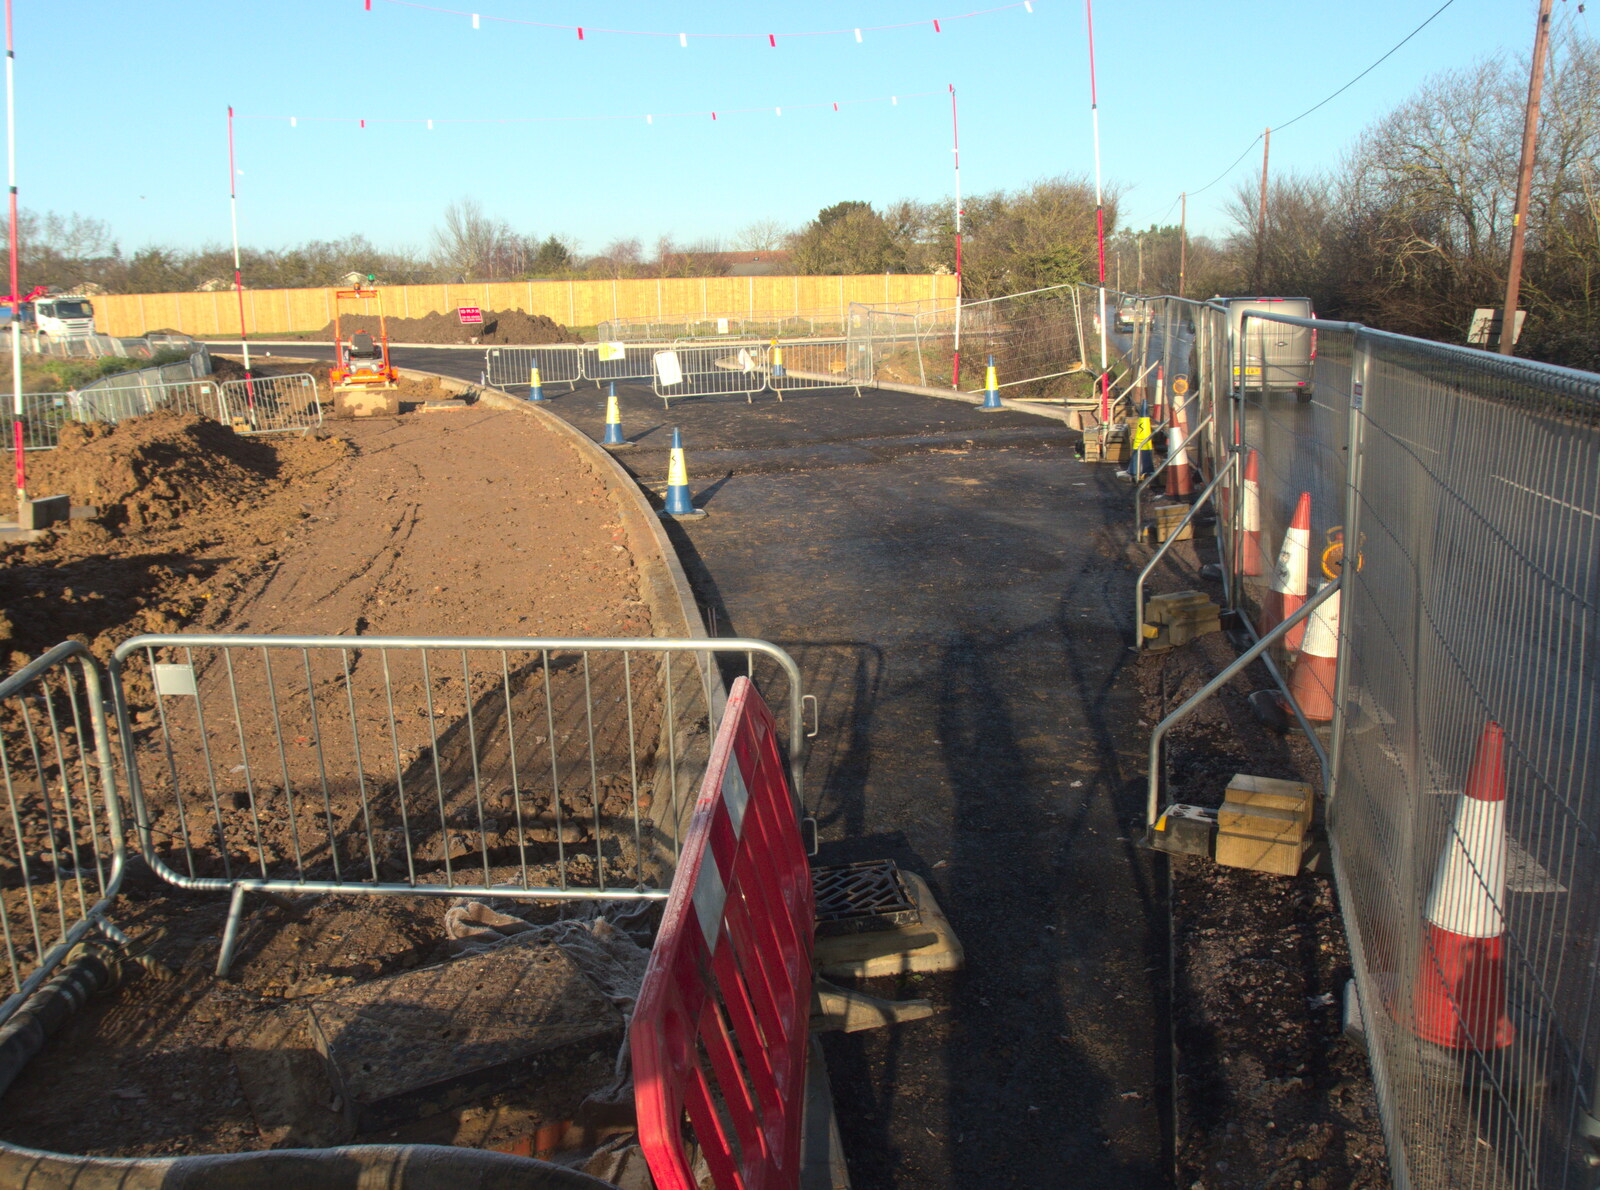 The new 'Brome Bypass' has some tarmac on it from Fun With Ice in Lockdown, Brome, Suffolk - 10th January 2021